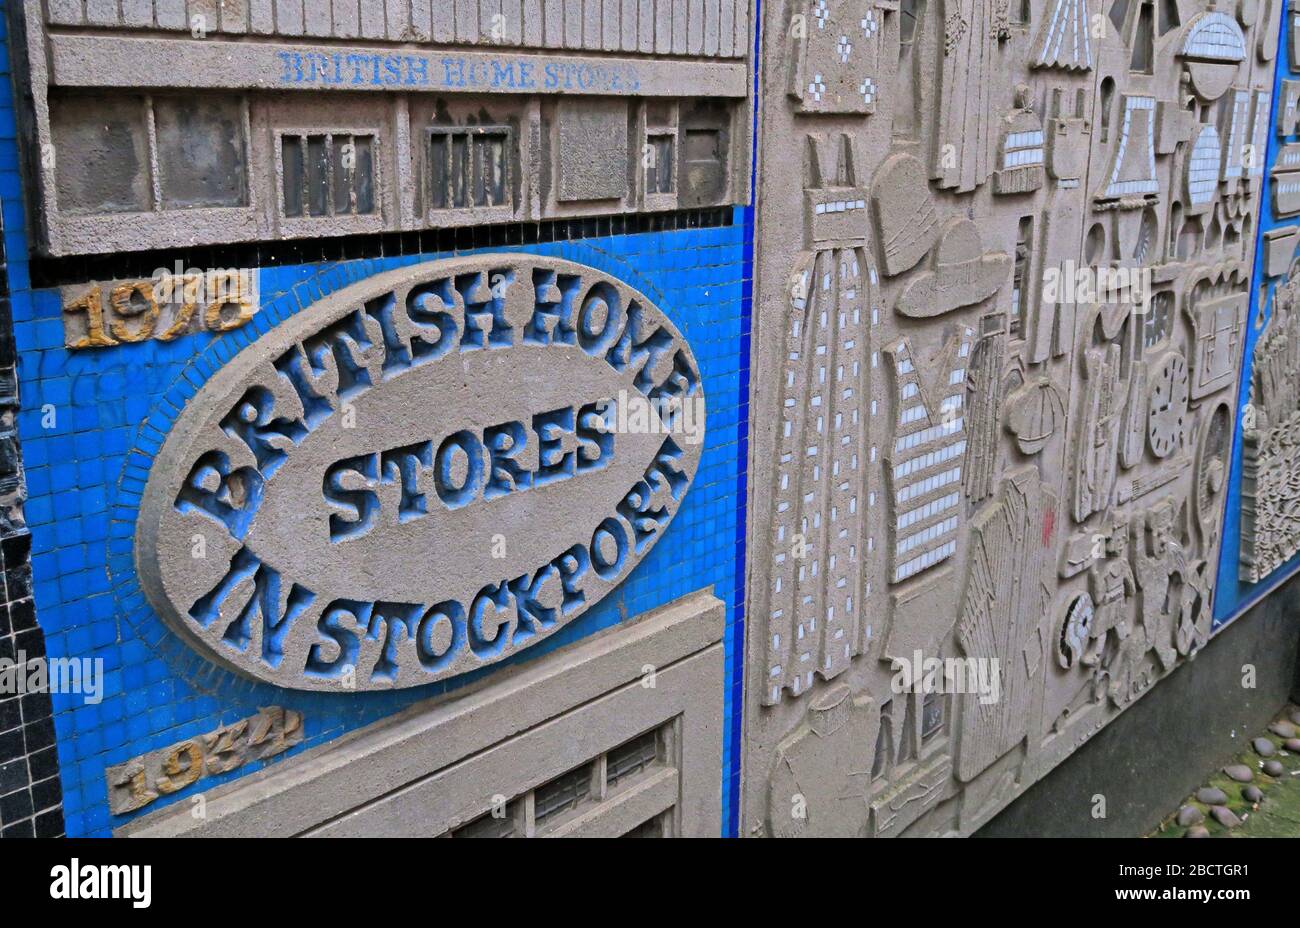 British Home Stores In Stockport,BHS,1978,1934, wall artwork,Merseyway Shopping Centre, Stockport Town Centre,Greater Manchester, UK, SK1 1PD Stock Photo